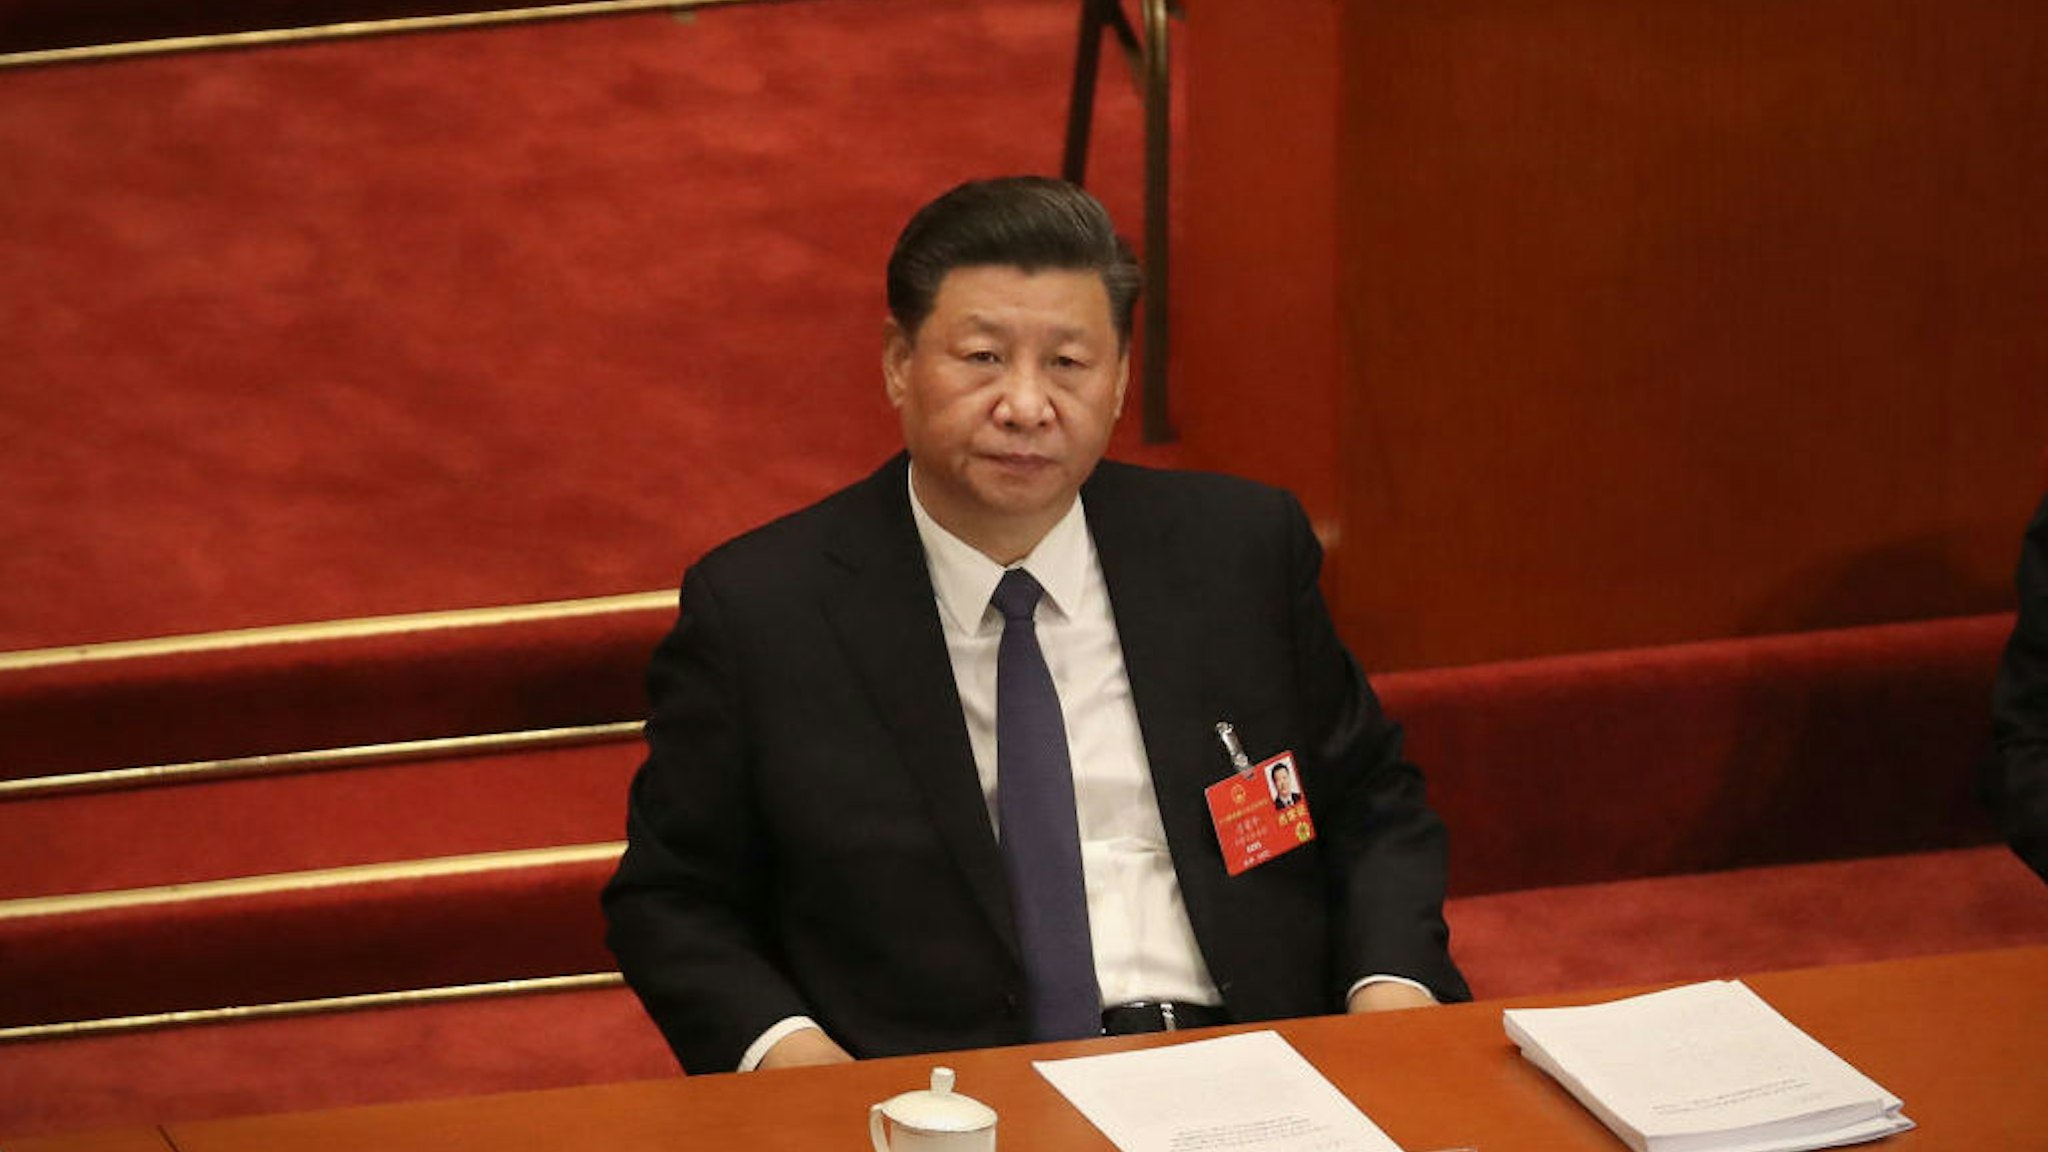 BEIJING, CHINA - MAY 22: Chinese President Xi Jinping attends the opening of the National People's Congress at The Great Hall Of The People on May 22, 2020 in Beijing, China. China is holding now its annual Two Sessions political meetings, that were delayed since March due to the Covid19 outbreak. (Photo by Andrea Verdelli/Getty Images)